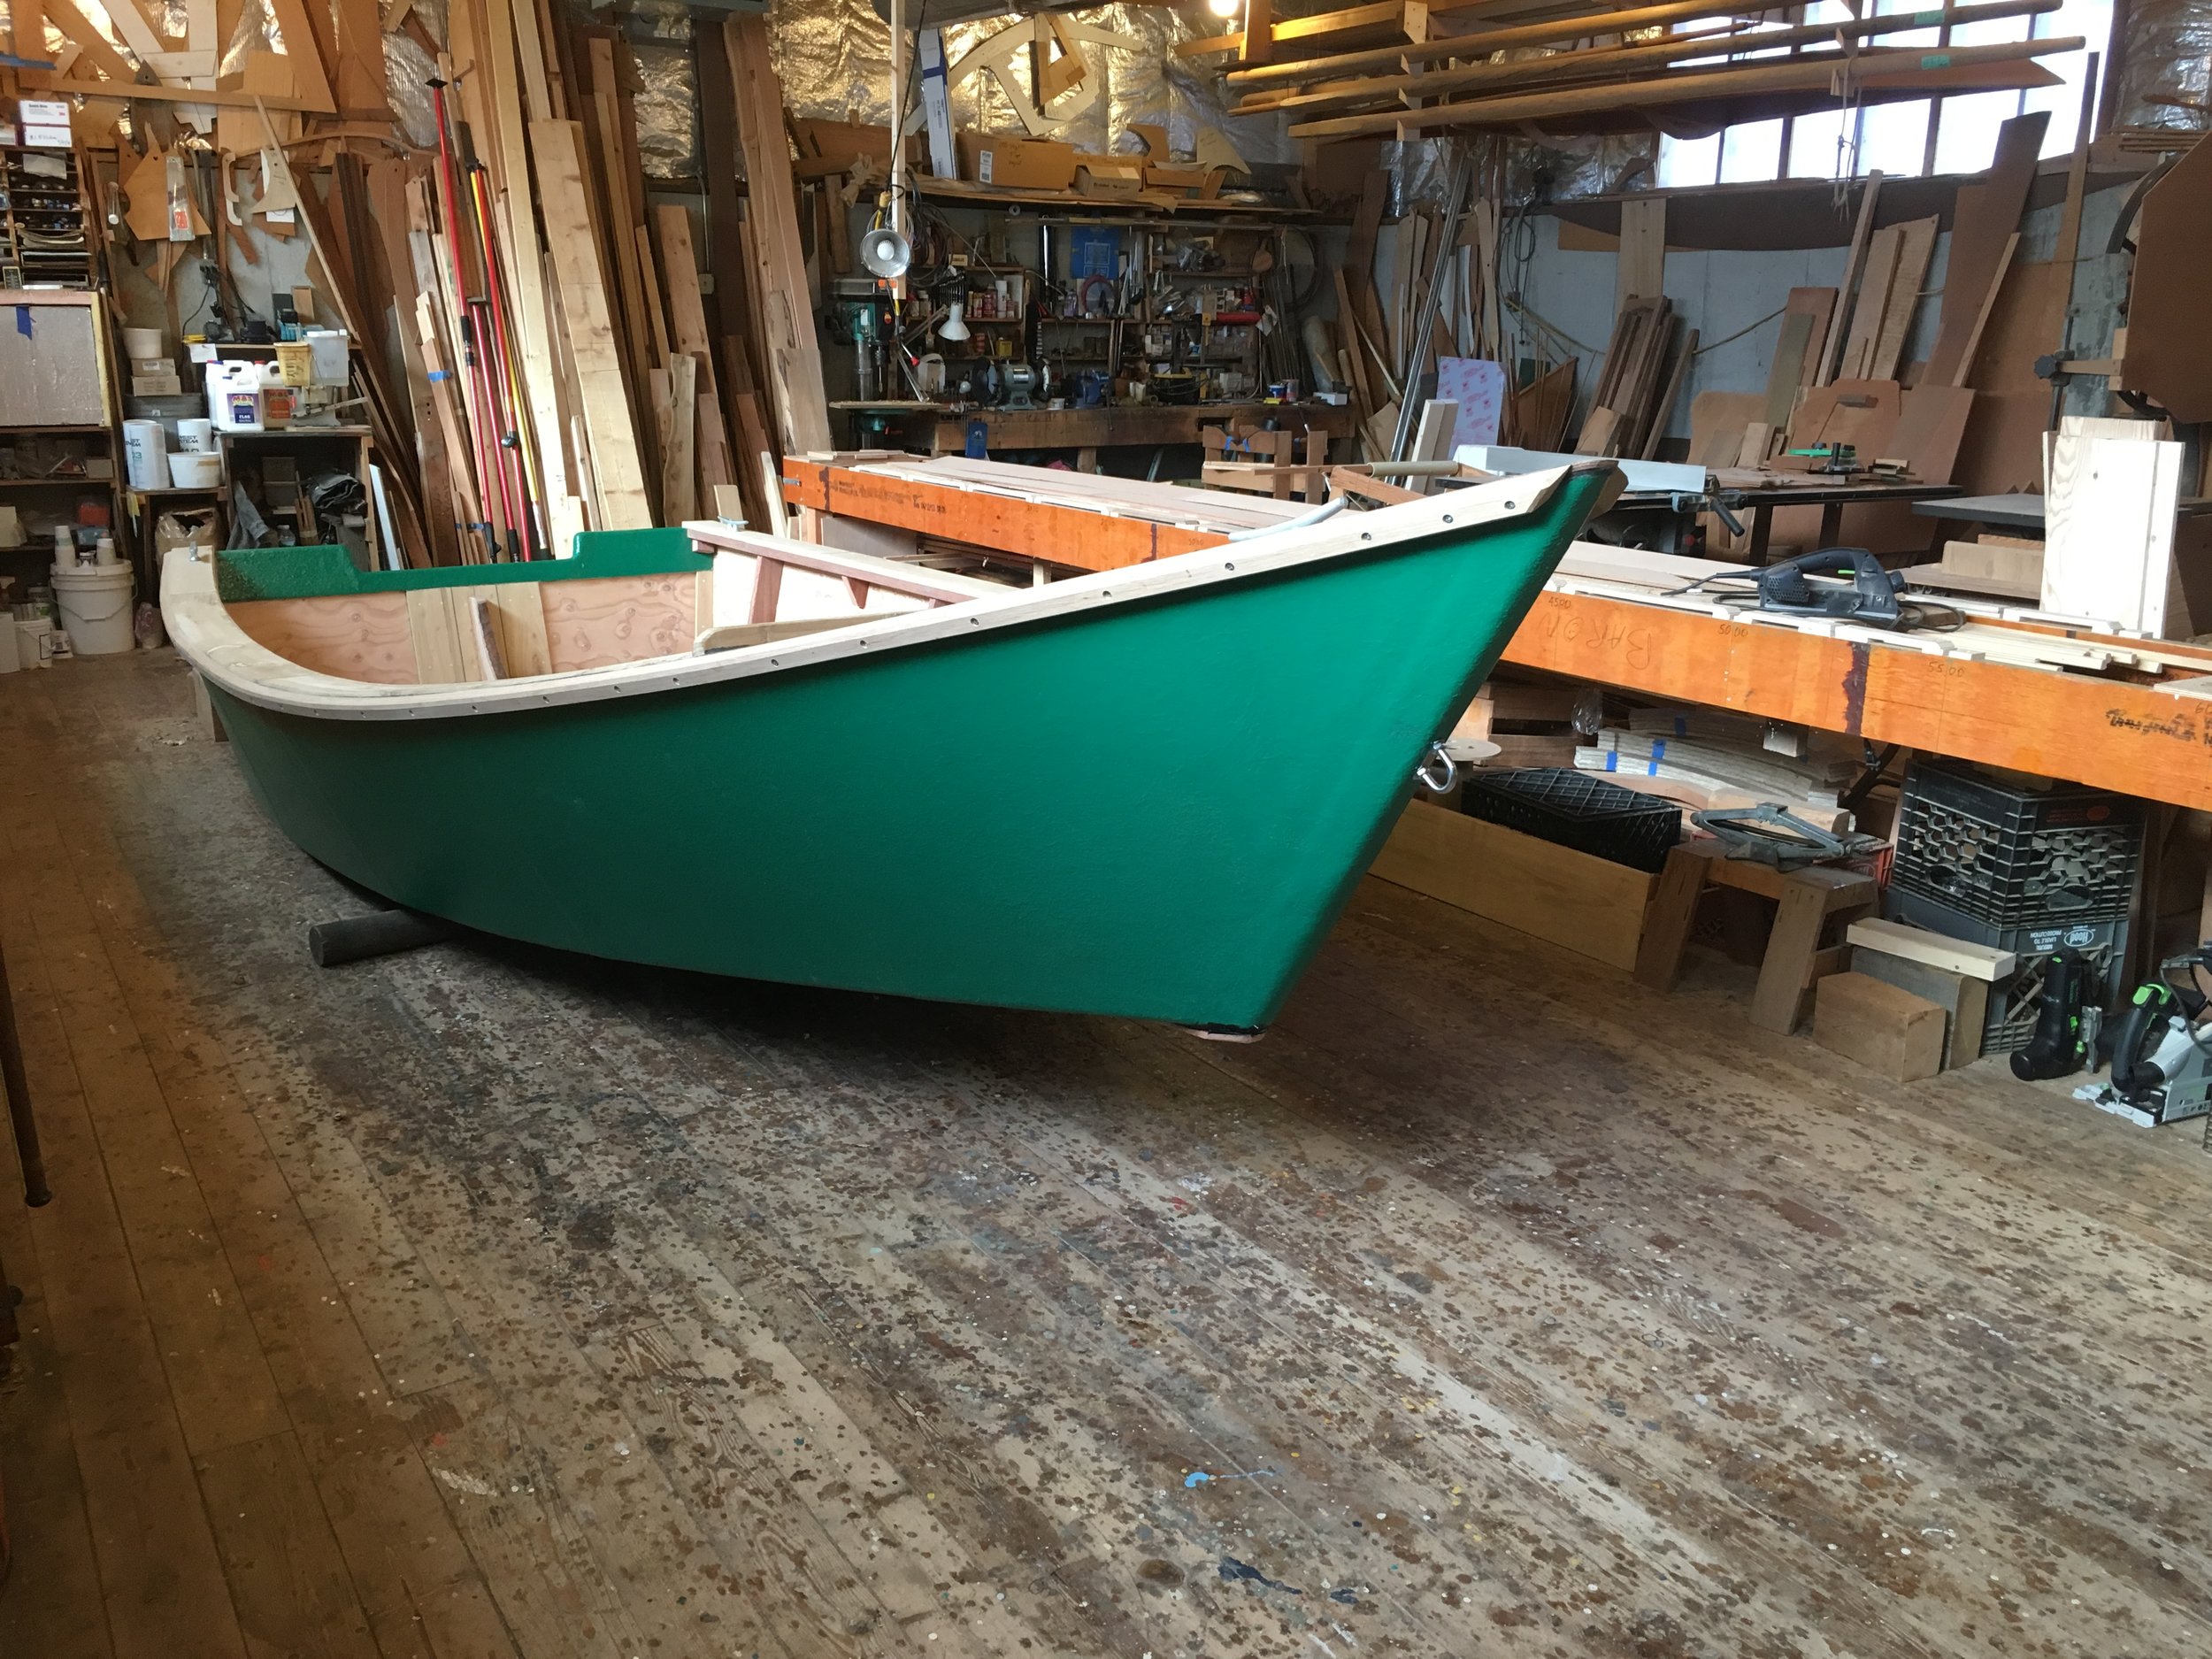 18' Work Skiff, on the rollers and ready to go out the door.